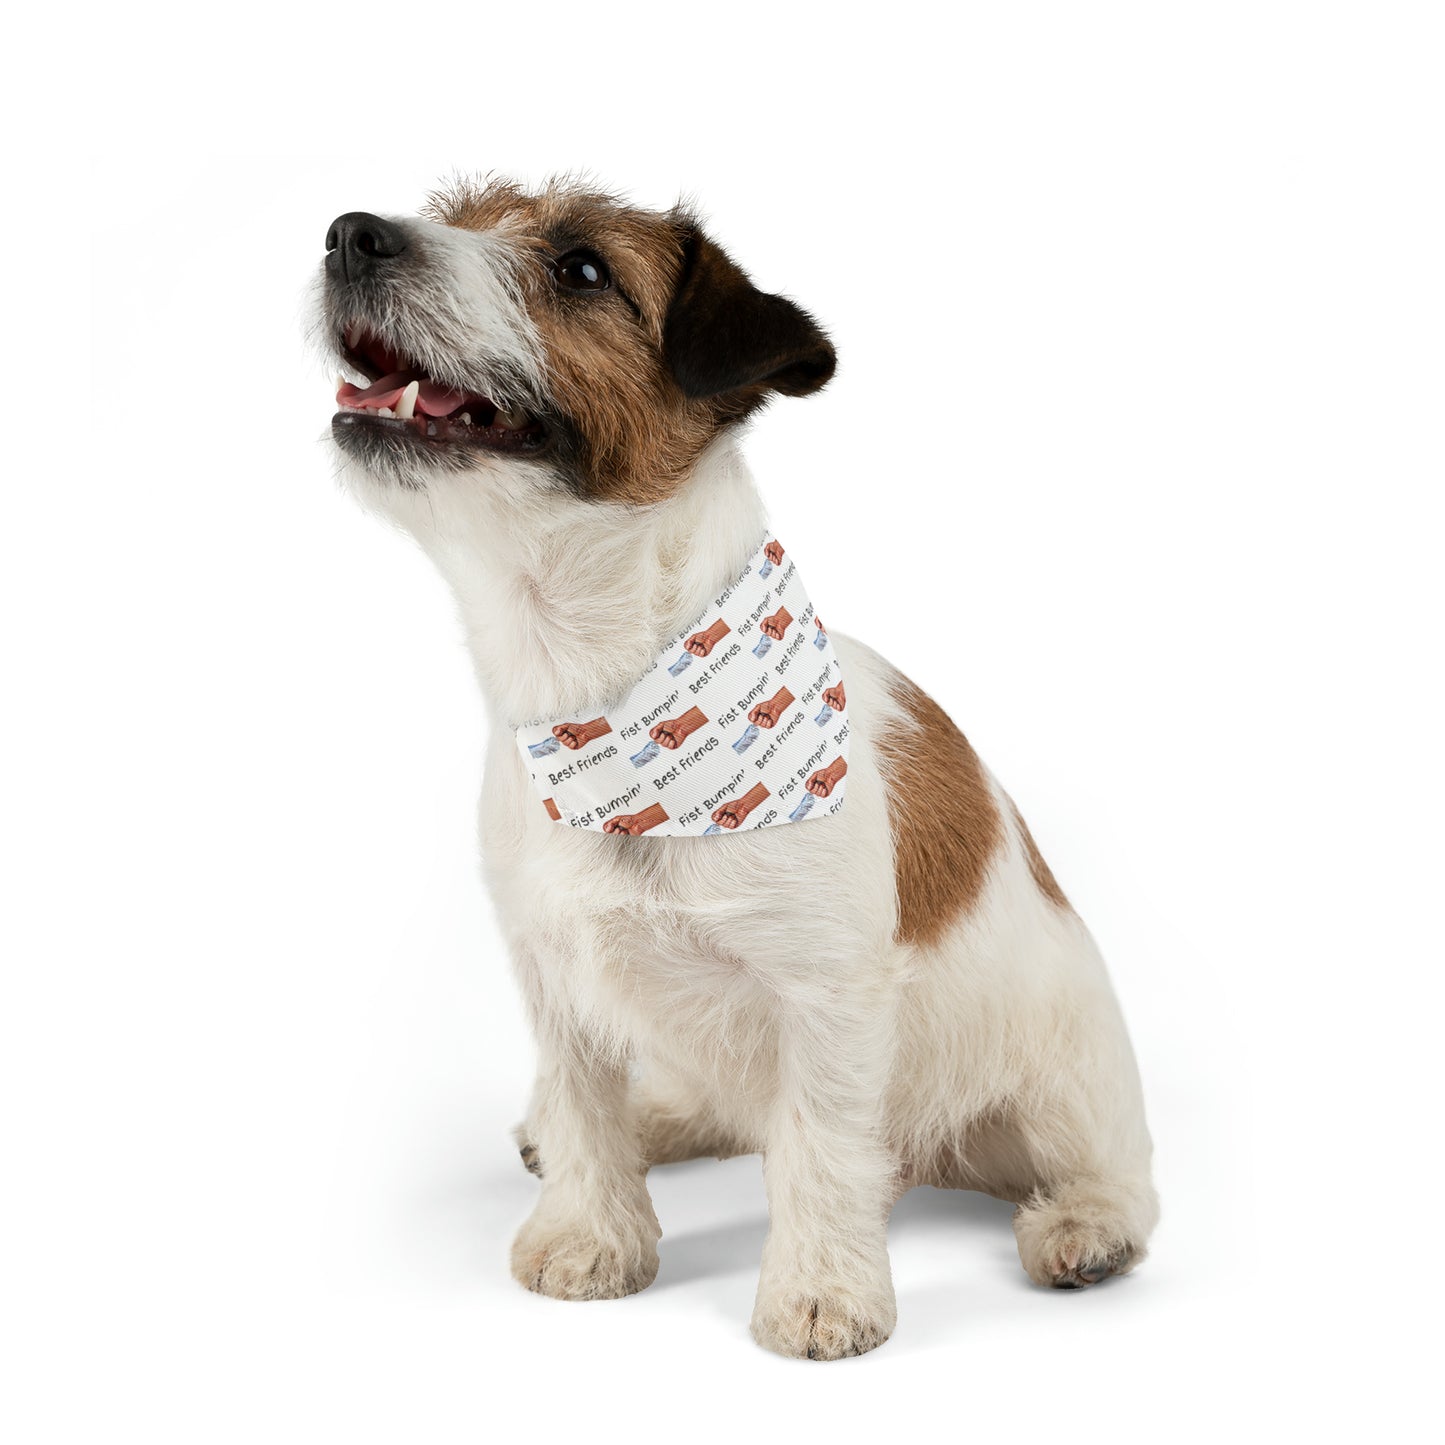 Fist Bumpin’ Best Friends Opie’s Cavalier King Charles Spaniel Paw Pet Bandana Collar White with Black lettering.